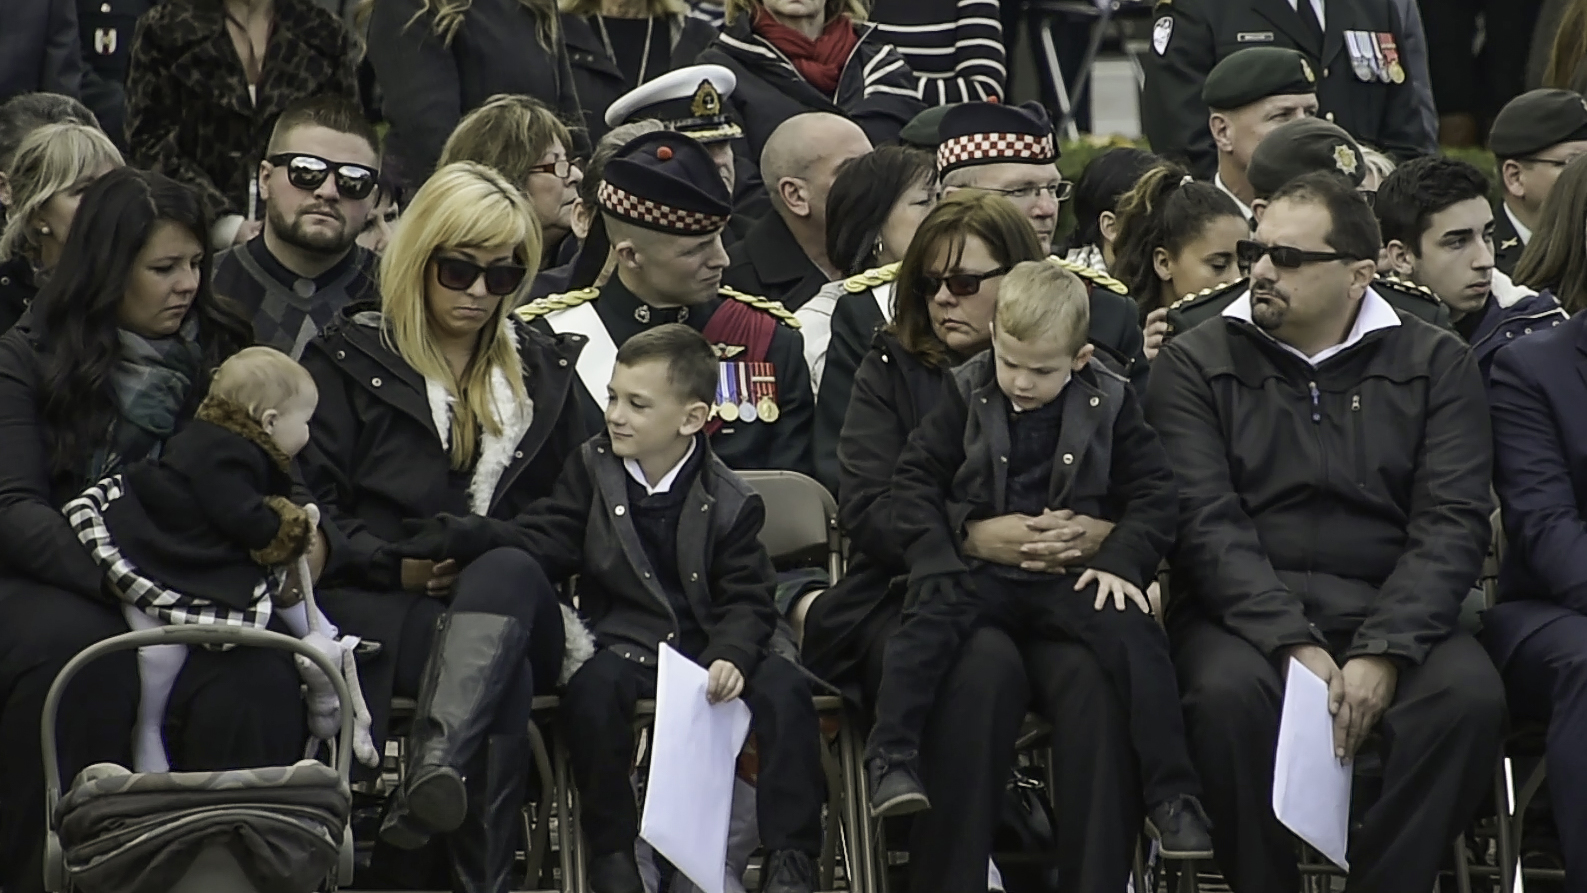 Members of the Cirillo family attend the Commemoration of the events of October 2014 ceremony in Ottawa, Ontario on October 22, 2015. Photo: Corporal Brett White-Finkle, Canadian Forces Combat Camera IS20-2015-0003-002